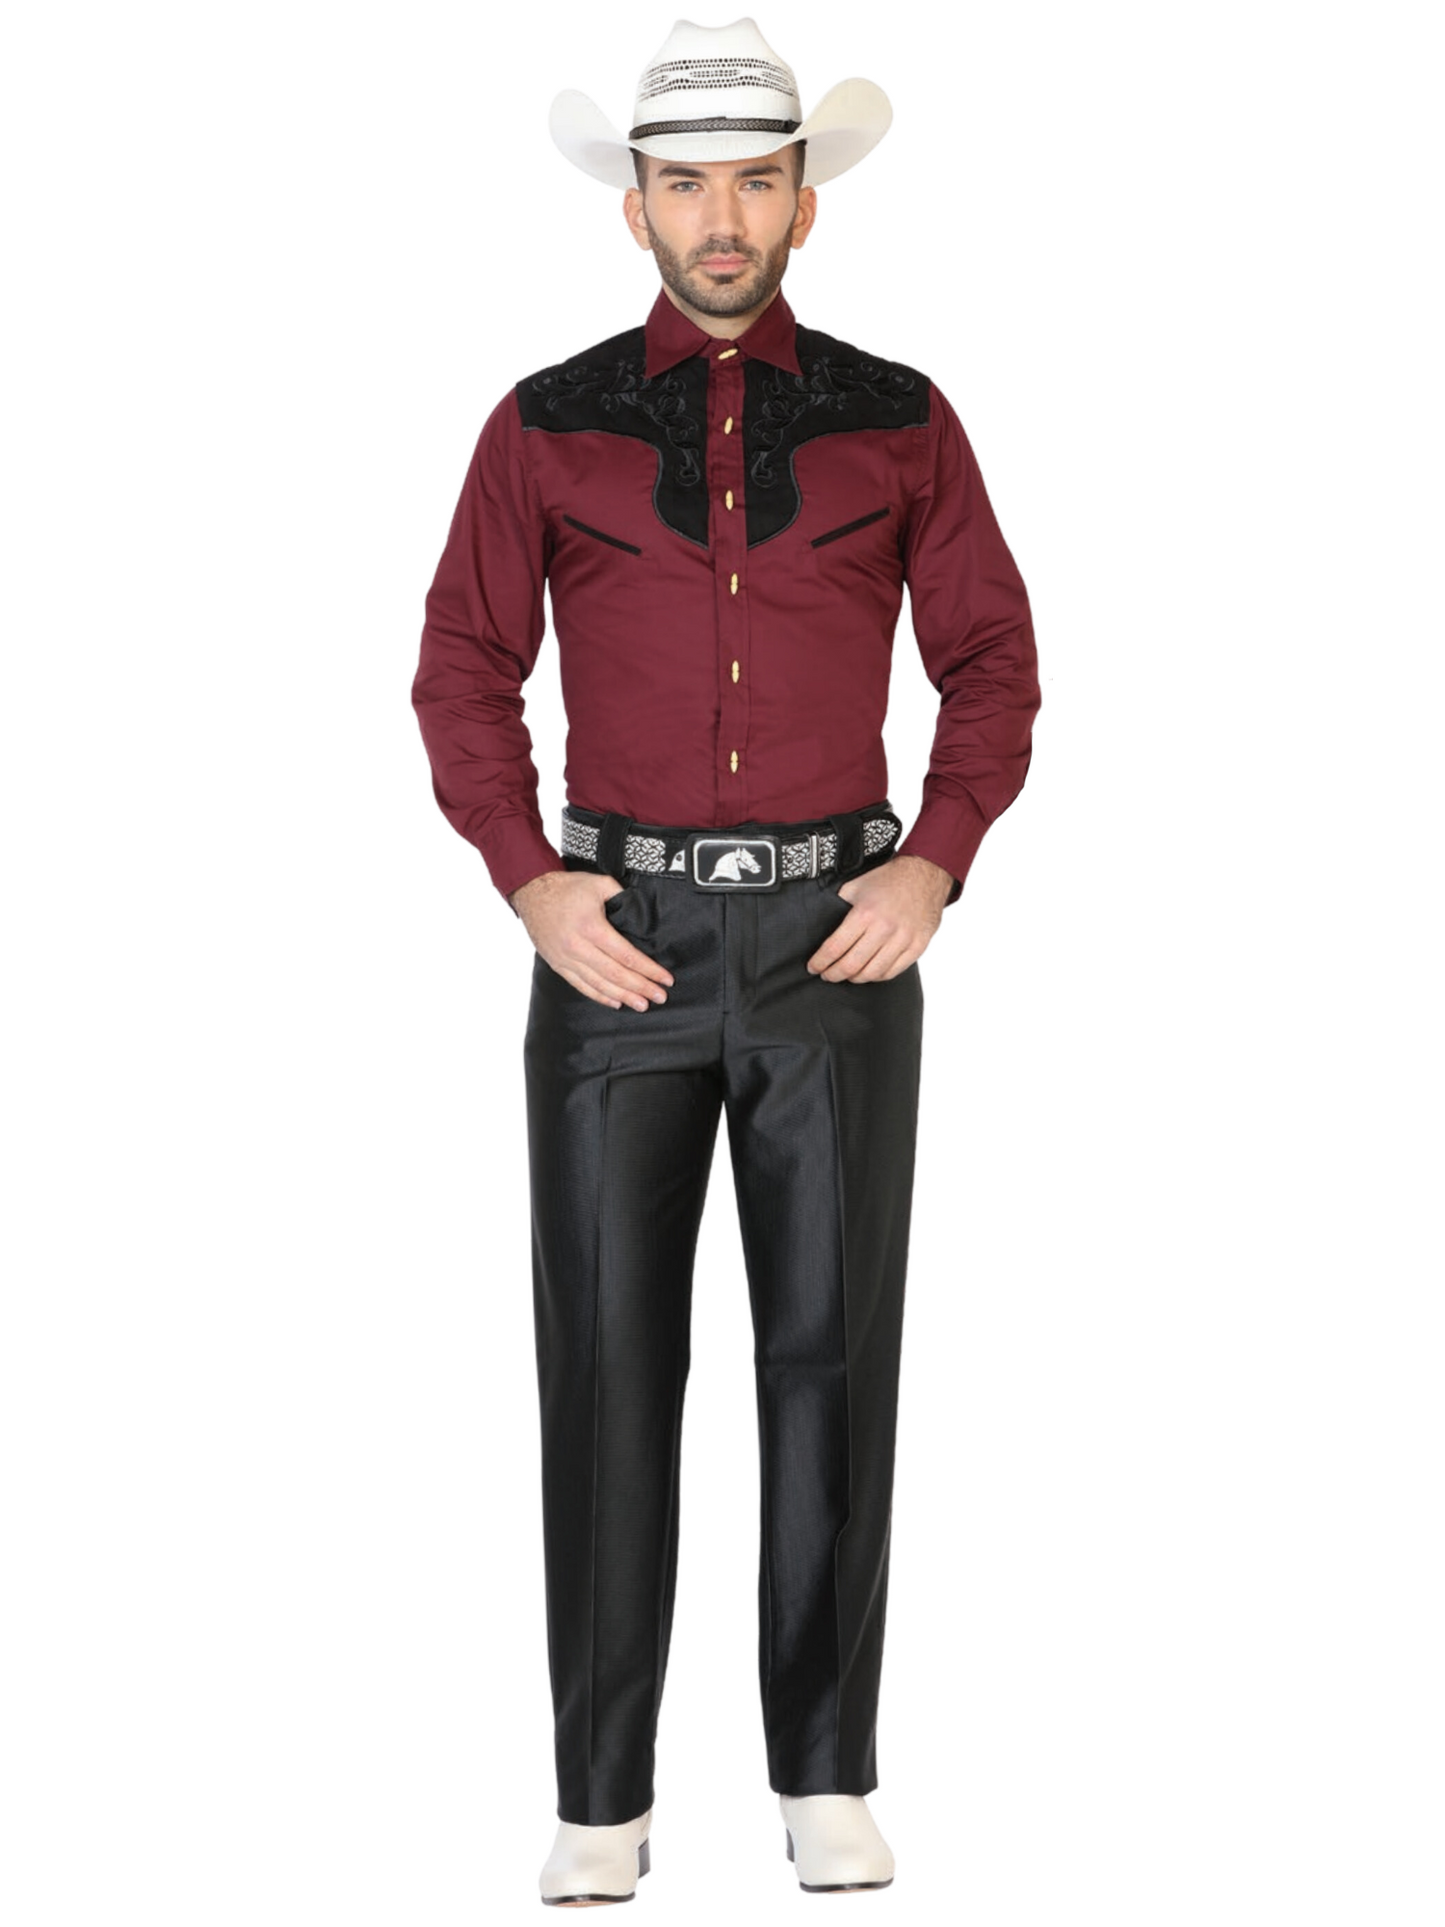 Black Plain Dress Pants for Men 'The Lord of the Skies' - ID: 42633